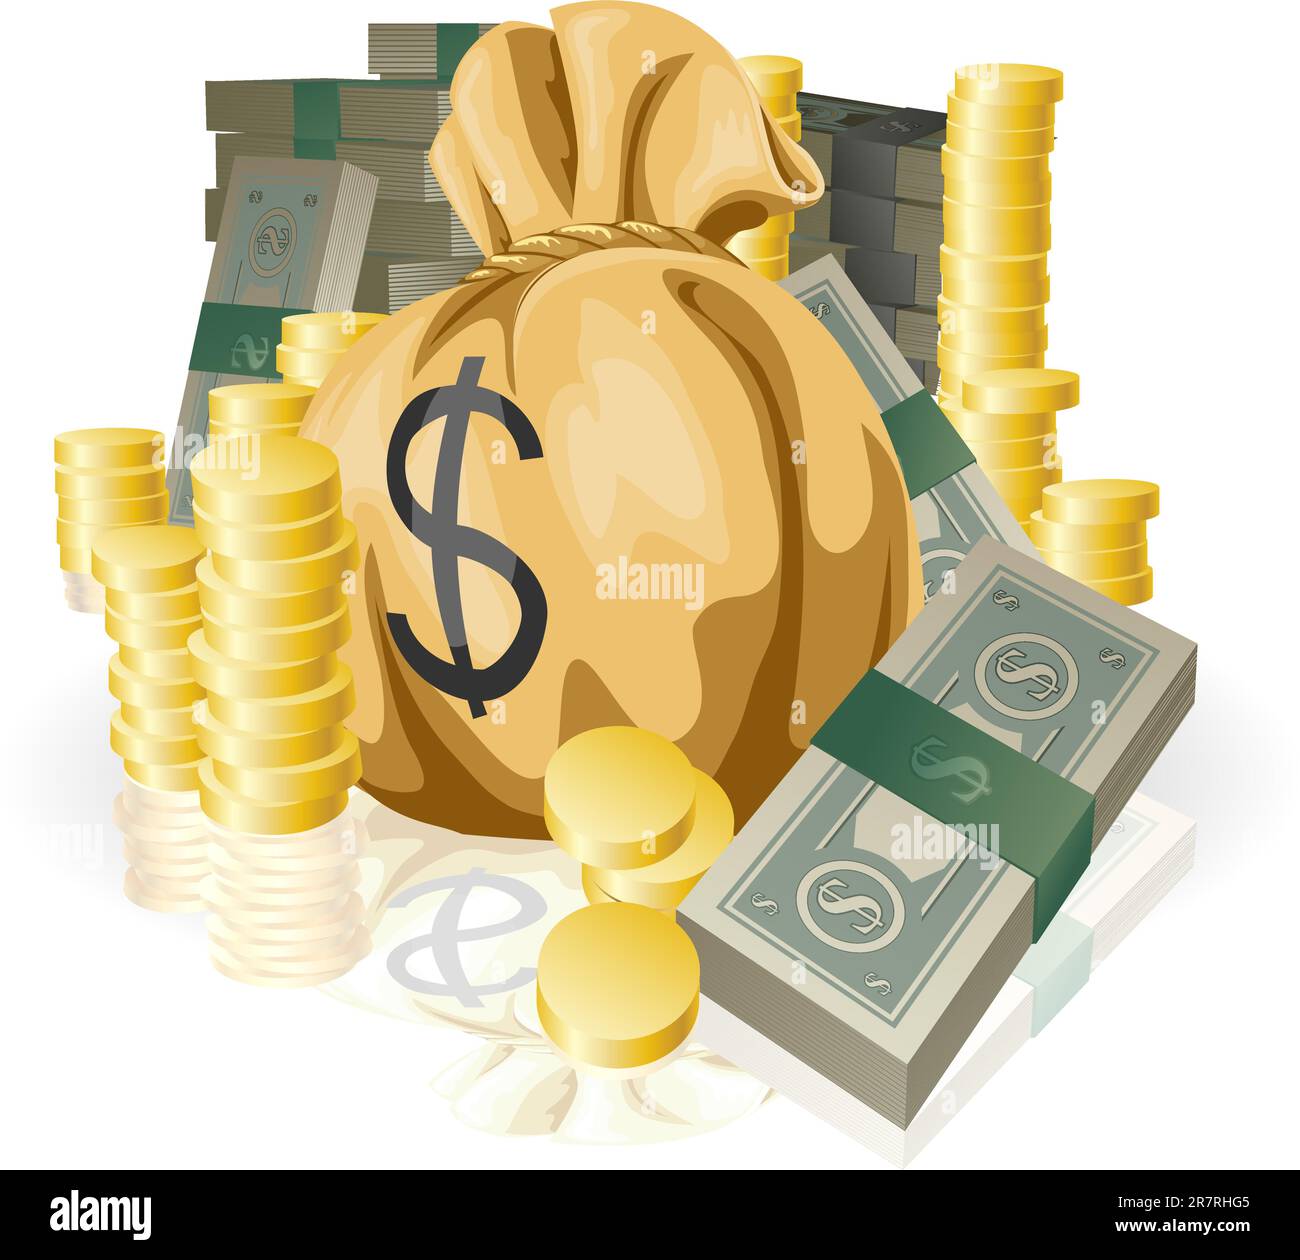 260 Bag Overflowing Money Images, Stock Photos, 3D objects